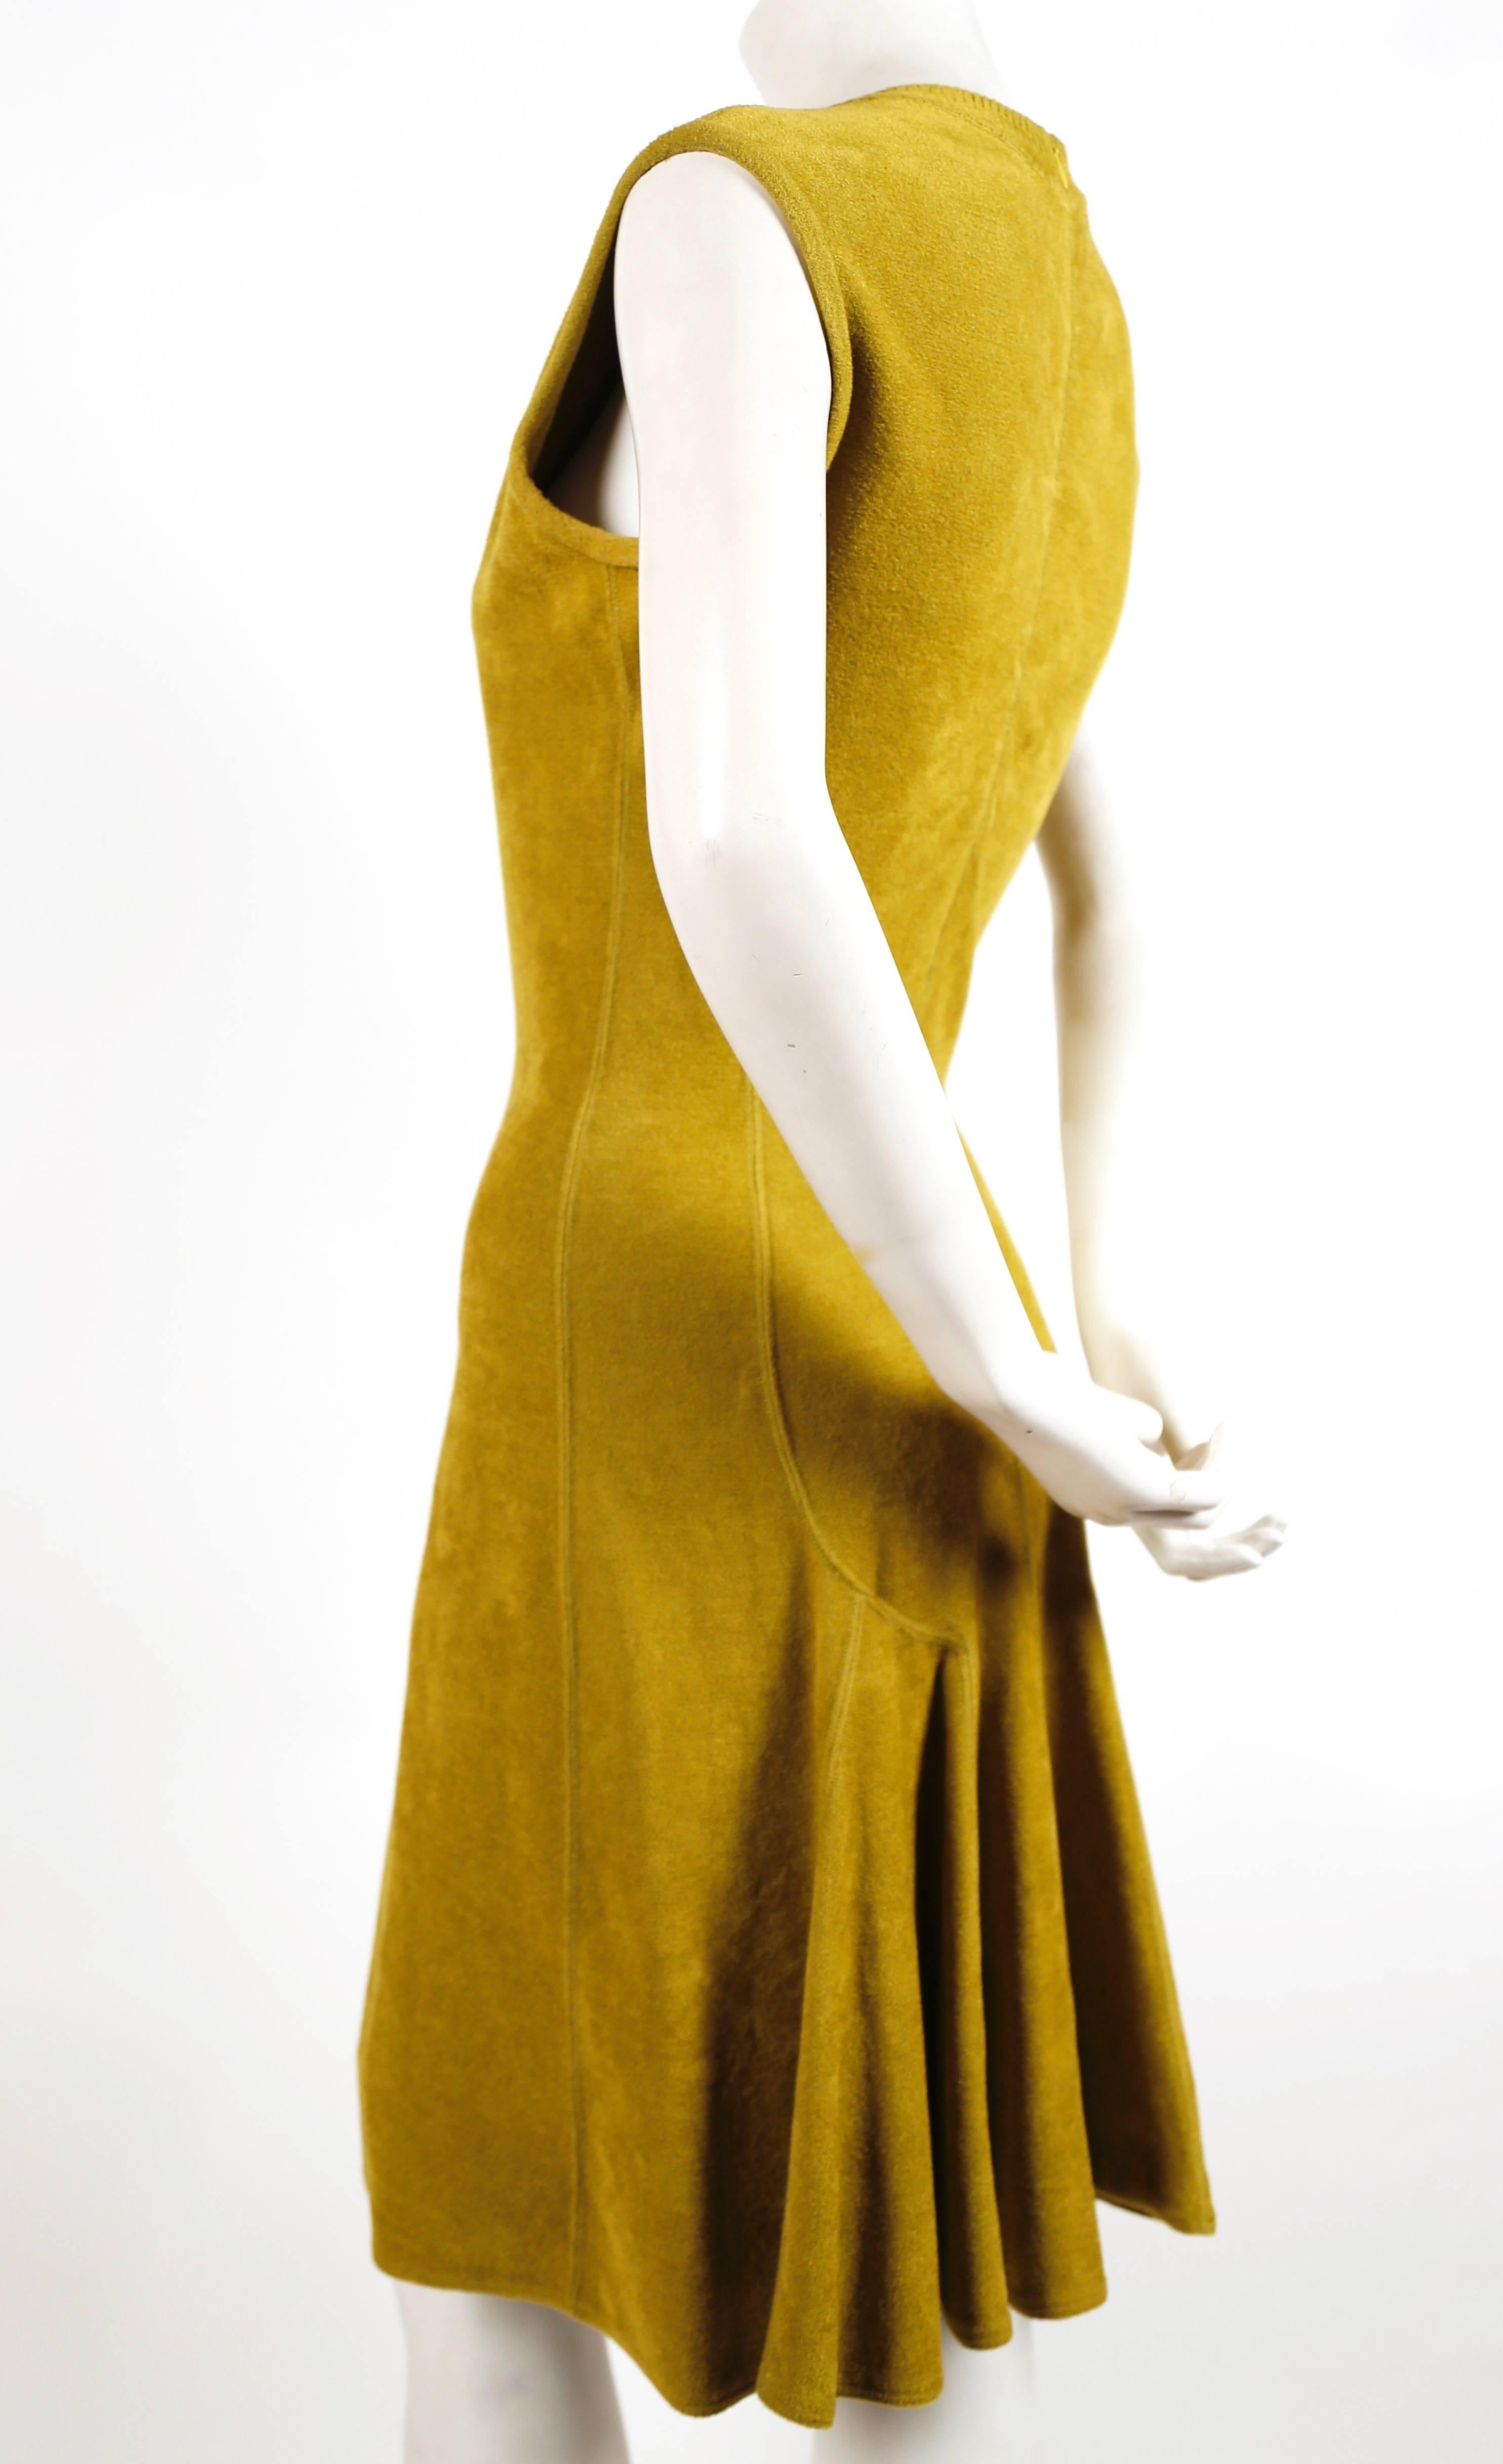 Vivid chartreuse chenille V-neck dress with flared skirt from Azzedine Alaia dating to the late 1990's. Labeled a size 'S' however this will easily accommodate a size medium as well. Approximate measurements: bust 34.5